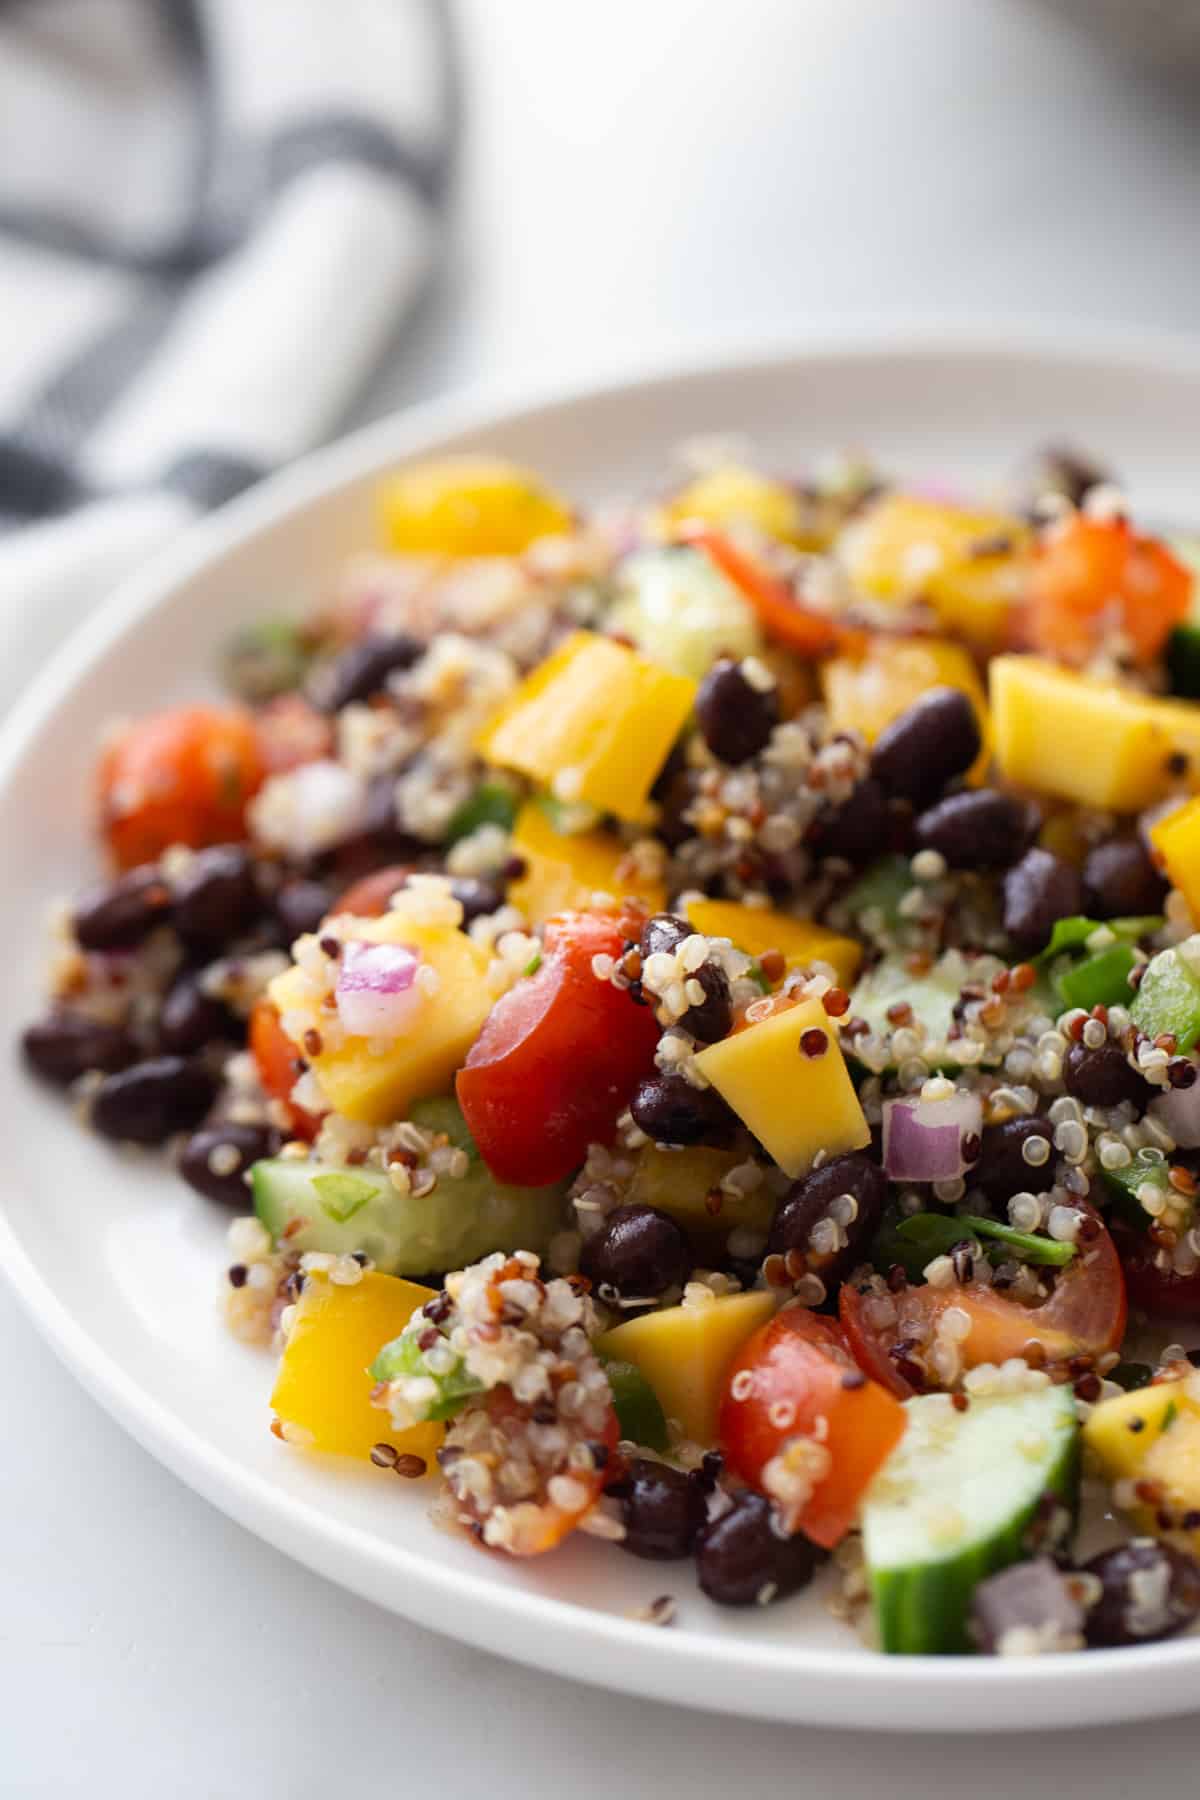 Close up photo of quinoa and black bean salad on a white plate.  There are chopped veggies, cooked quinoa, and black beans all mixed together.